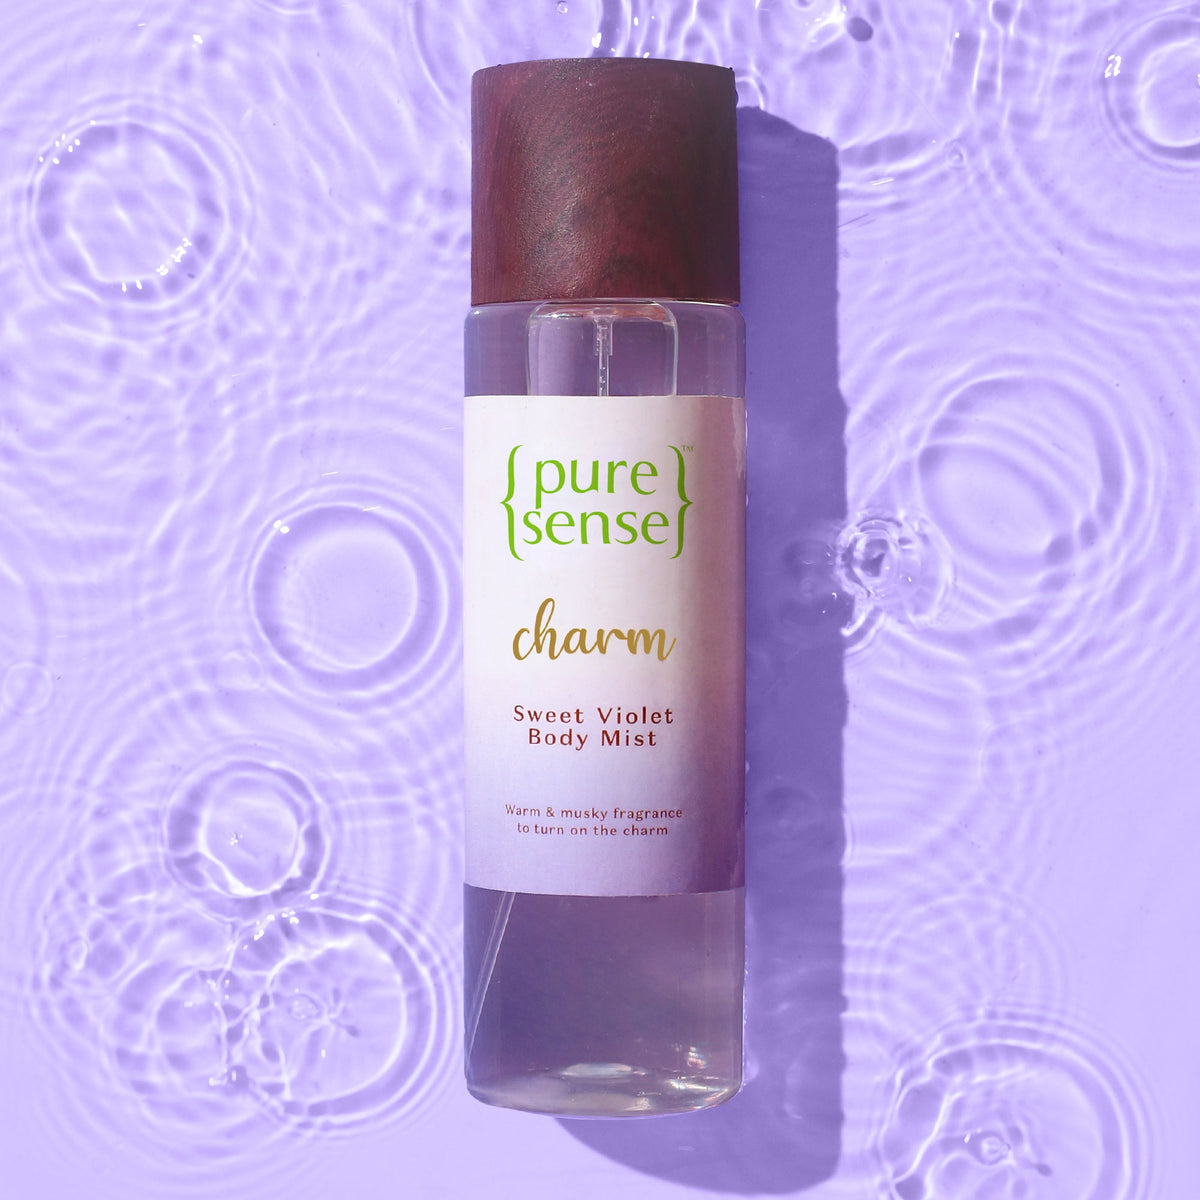 [CRED] Charm Sweet Violet Body Mist | From the makers of Parachute Advansed | 150ml